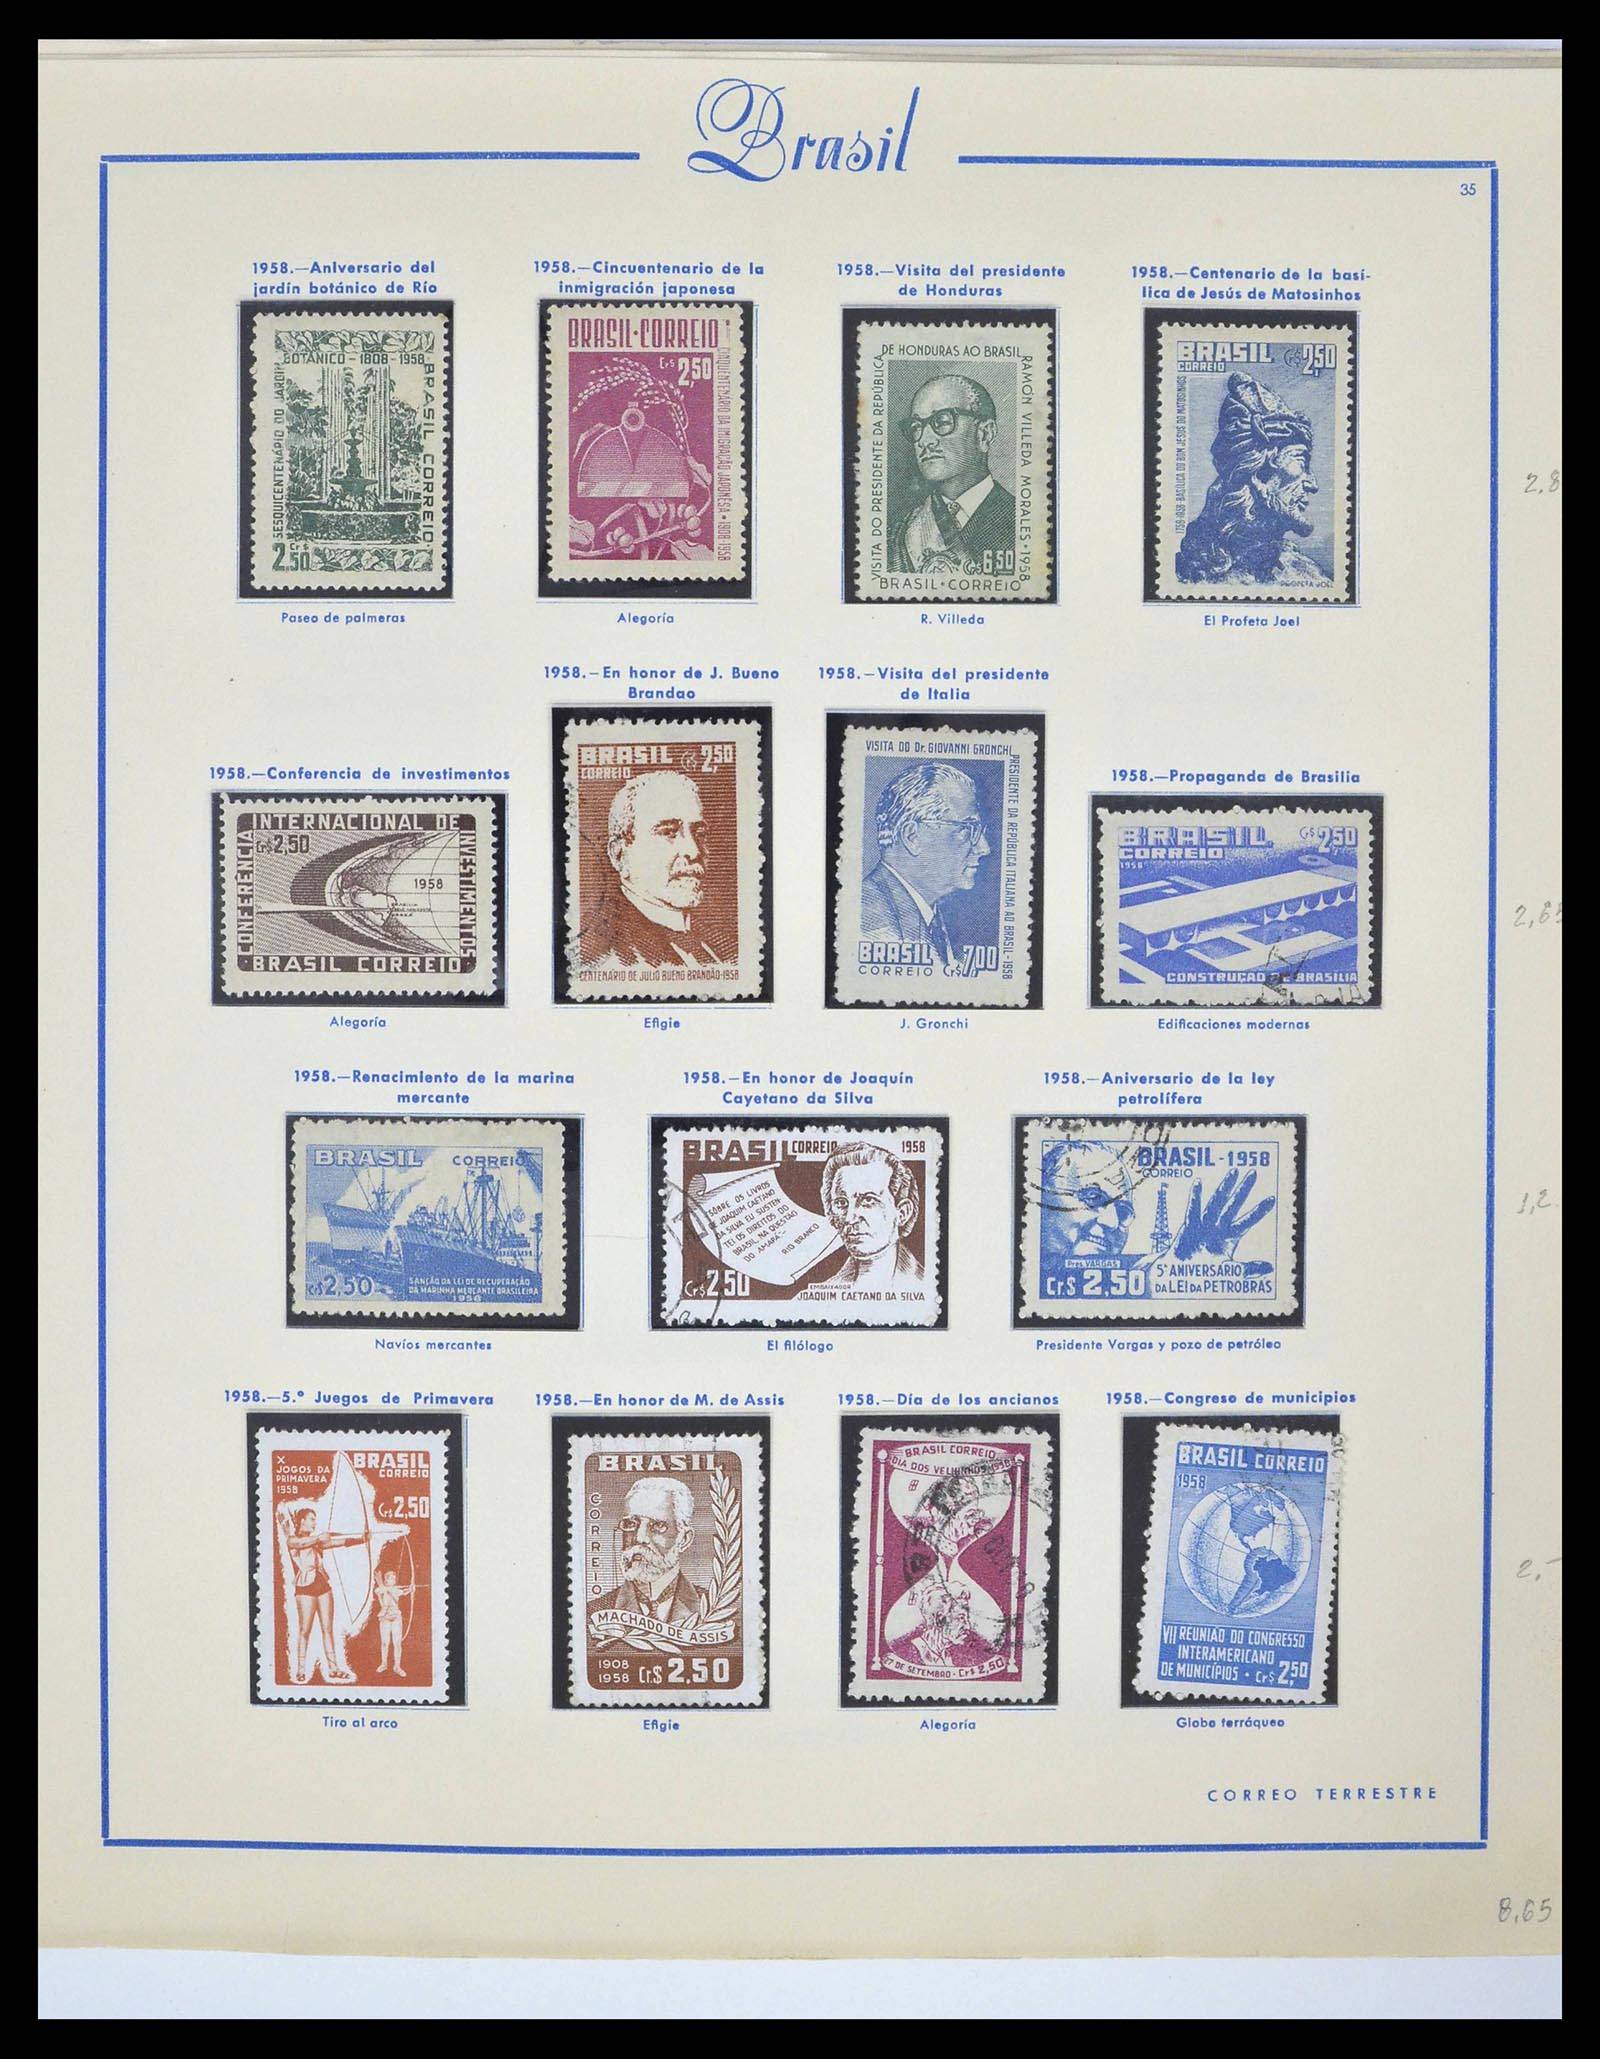 39245 0042 - Stamp collection 39245 Brazil 1843-1968.